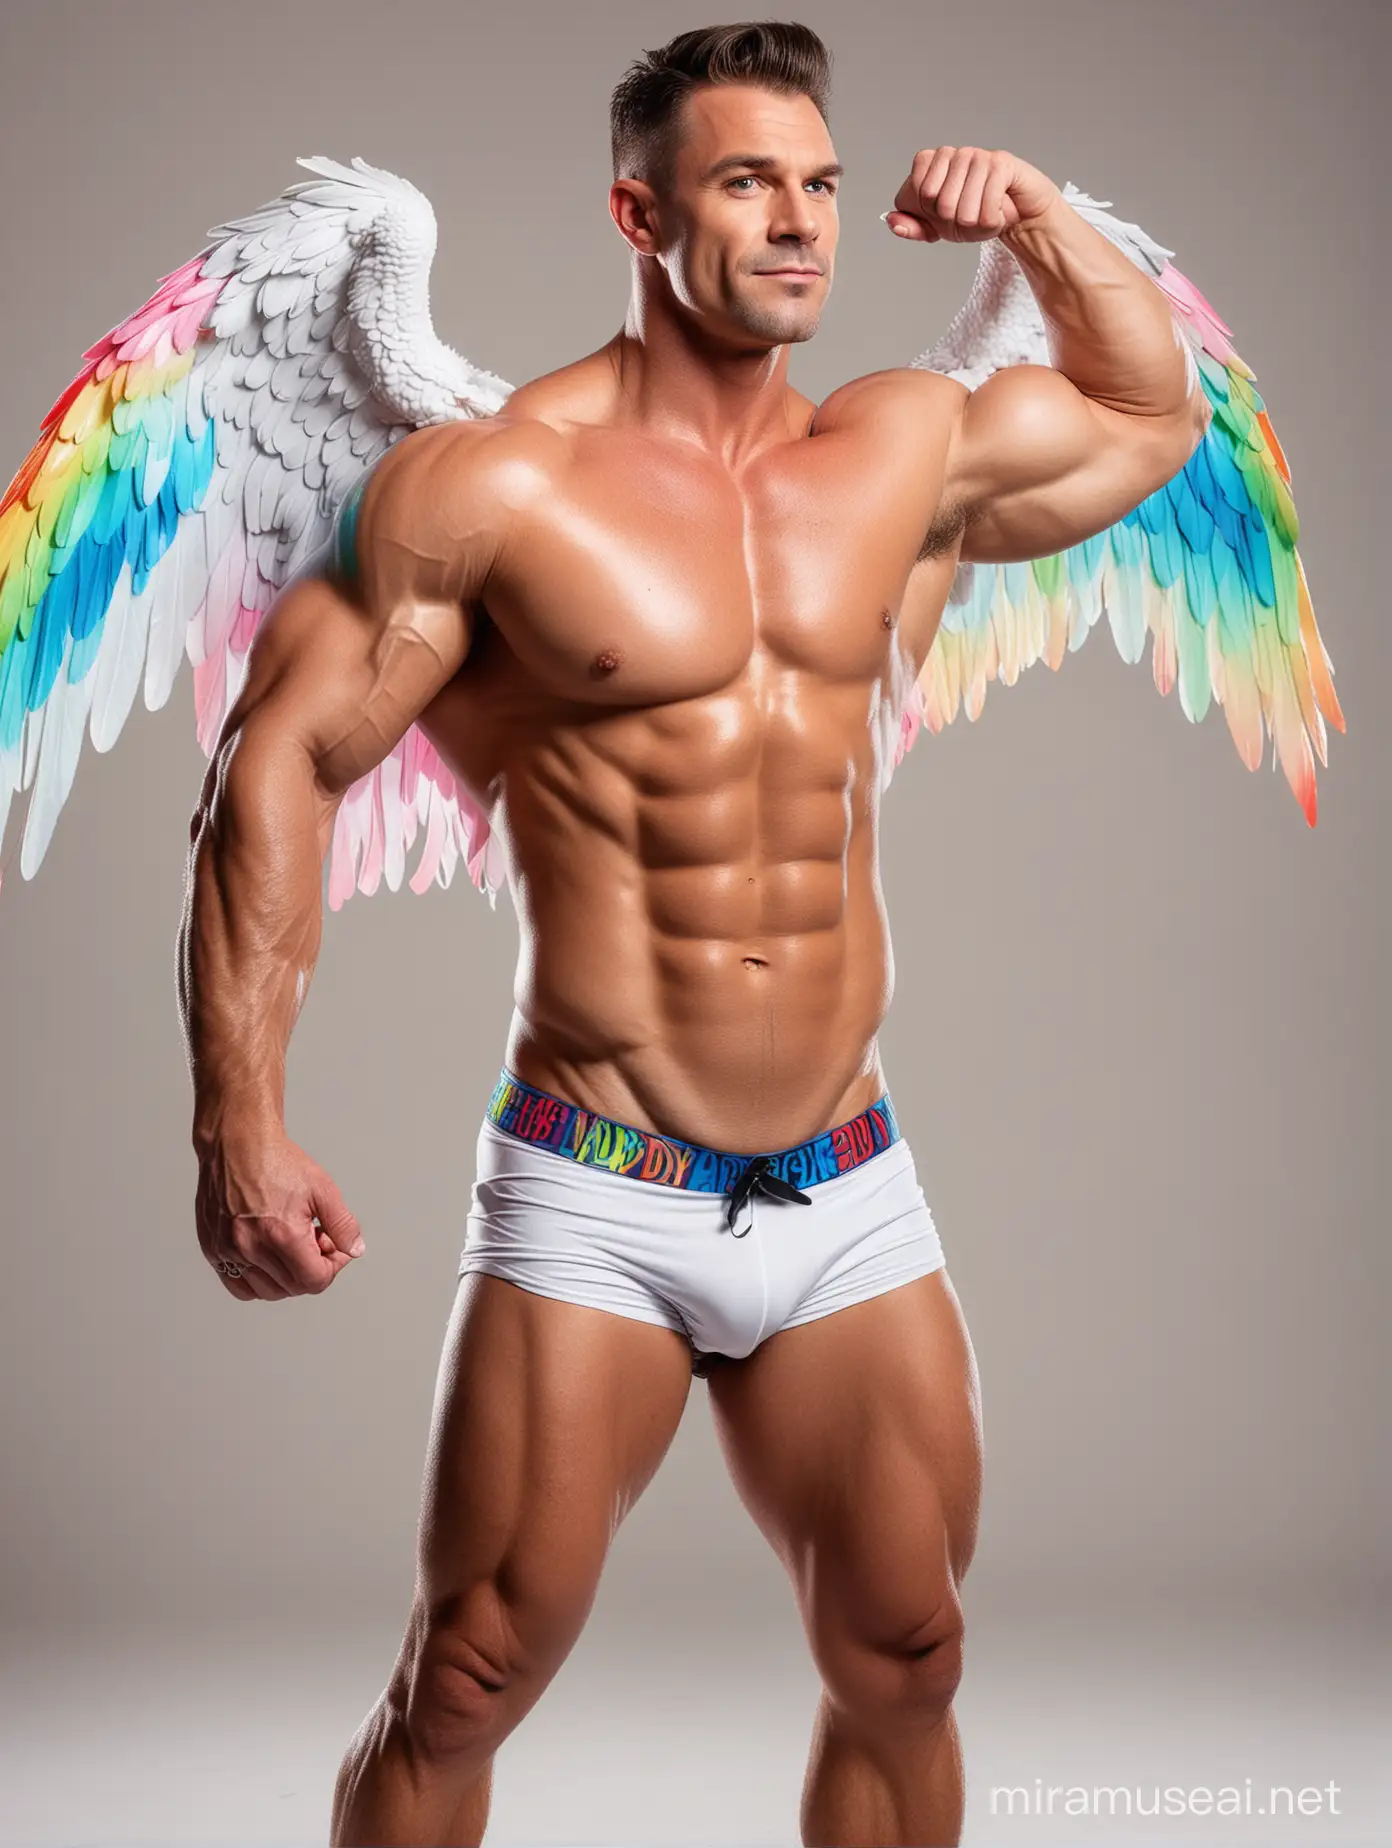 Muscular 30s Bodybuilder Flexing in Rainbow LED Jacket with Eagle Wings